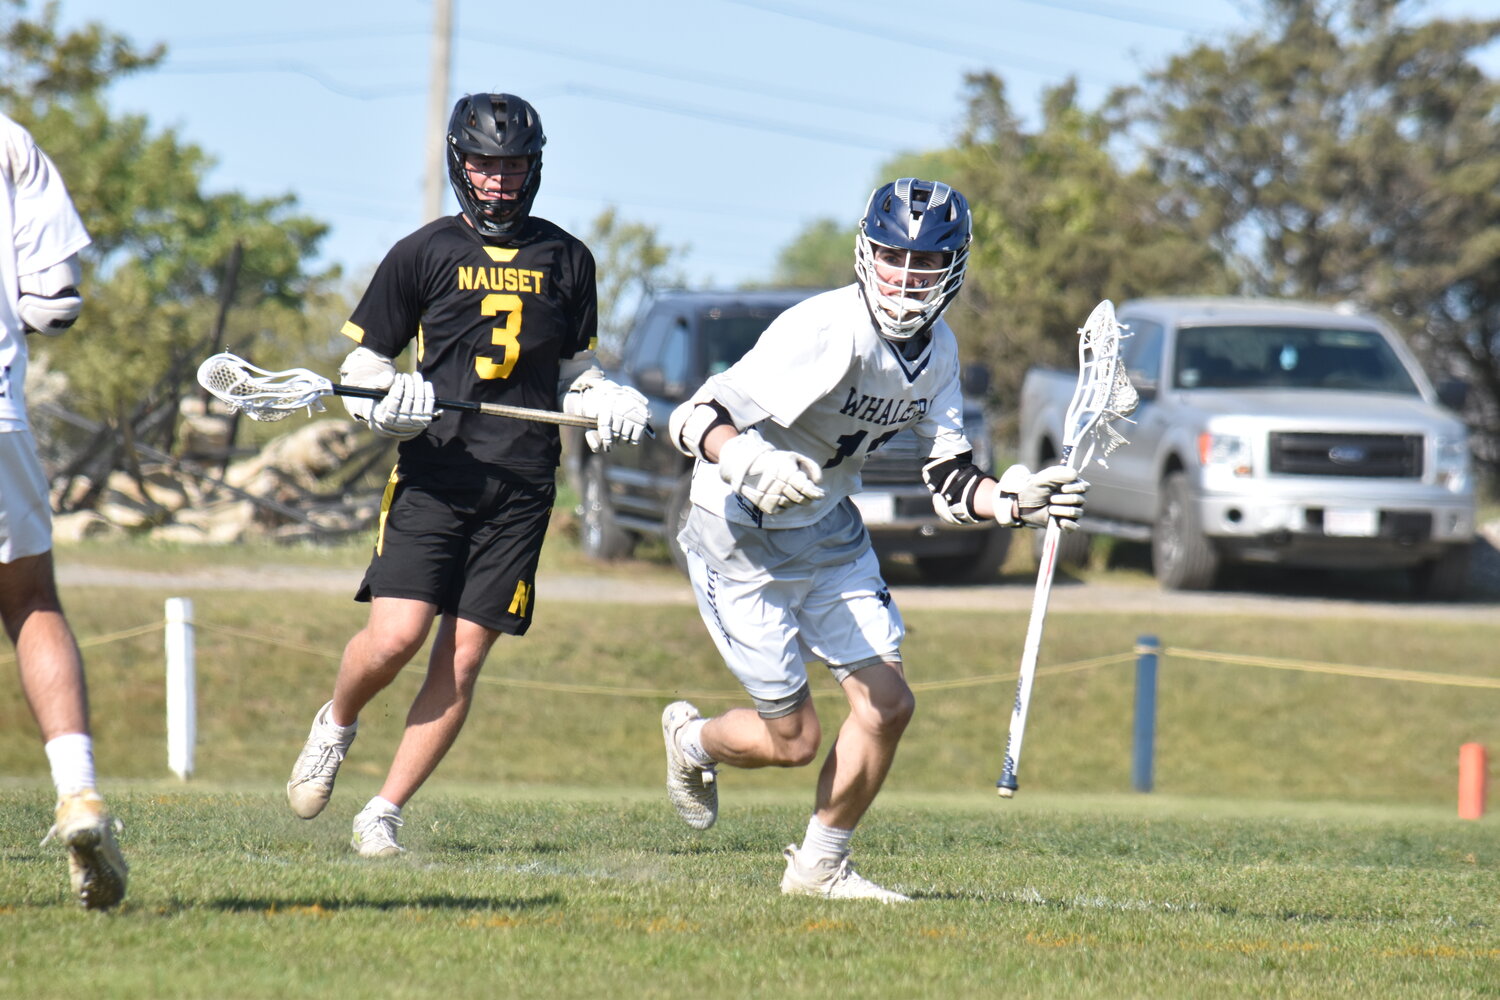 Sean Murphy runs past a Nauset player during the Whalers’ 16-6 loss last Thursday.